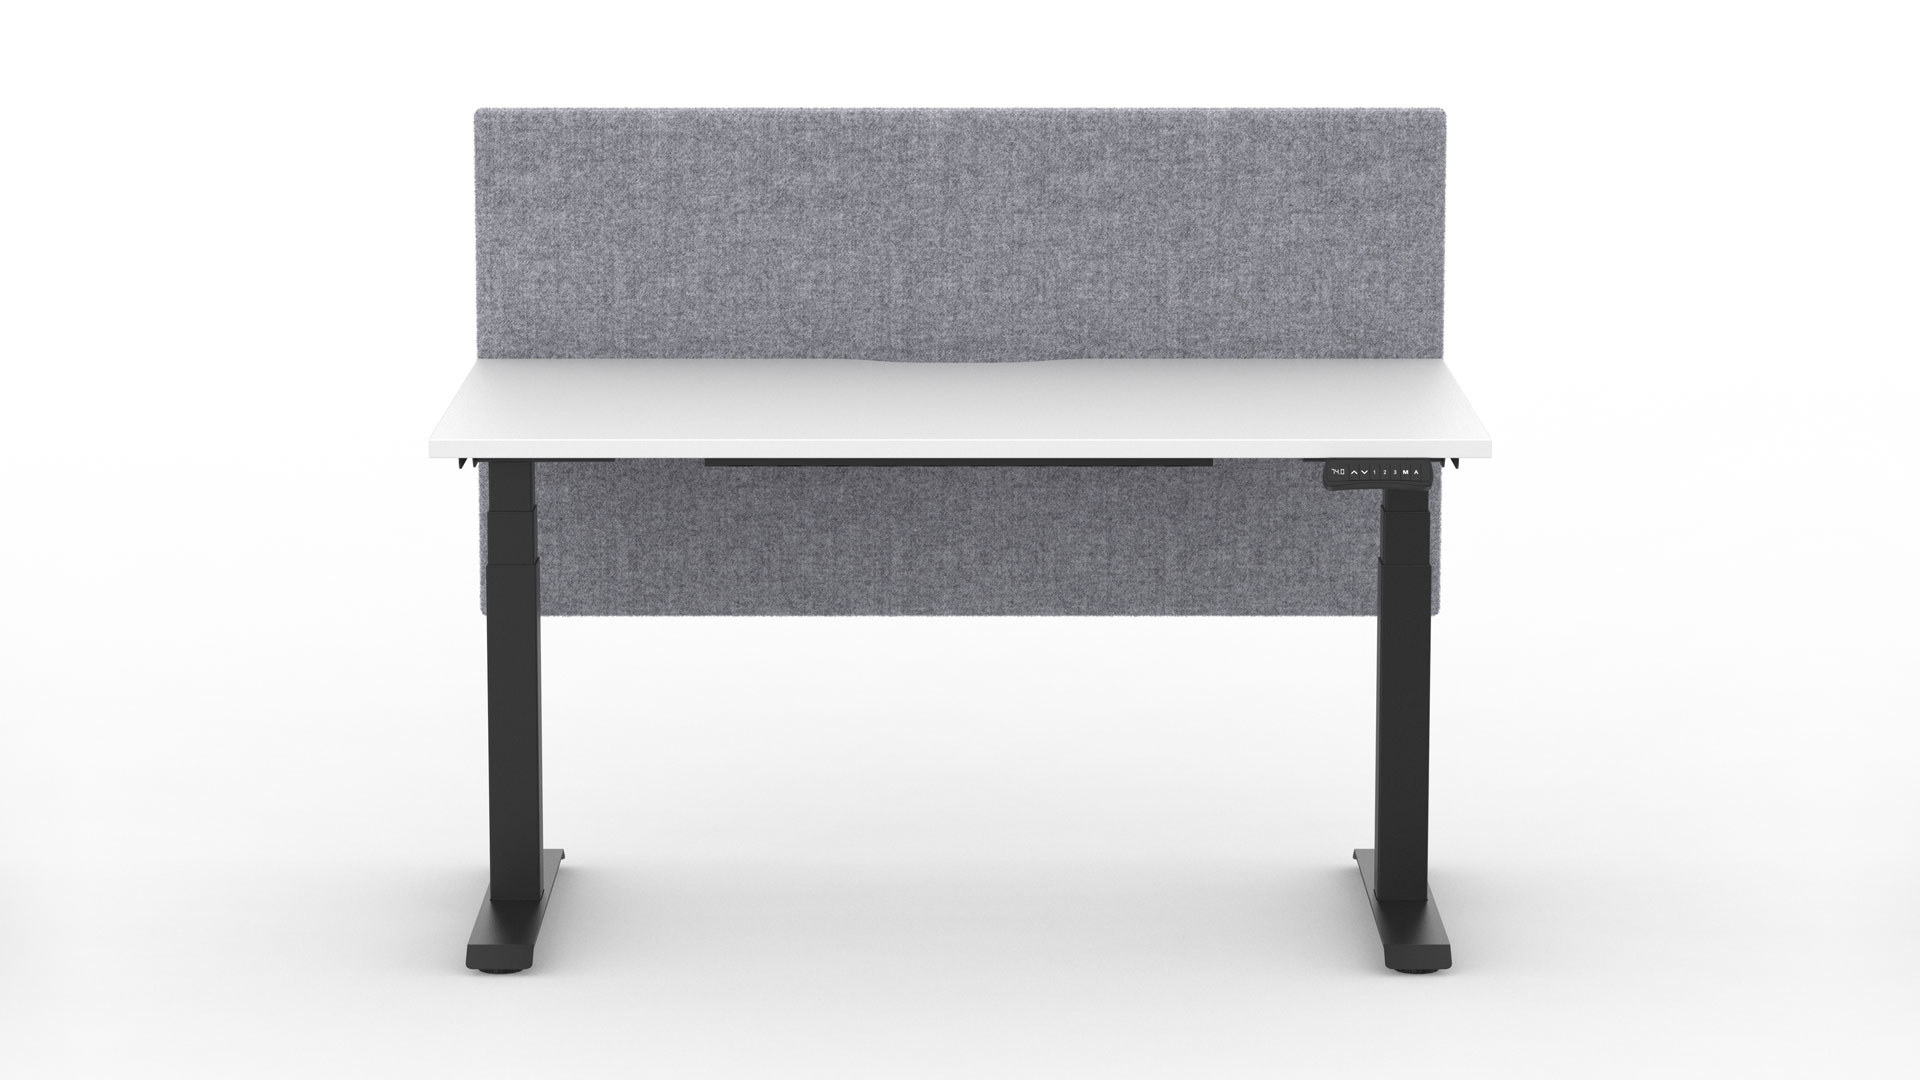 Fabric desk divider screens help to reduce background noise